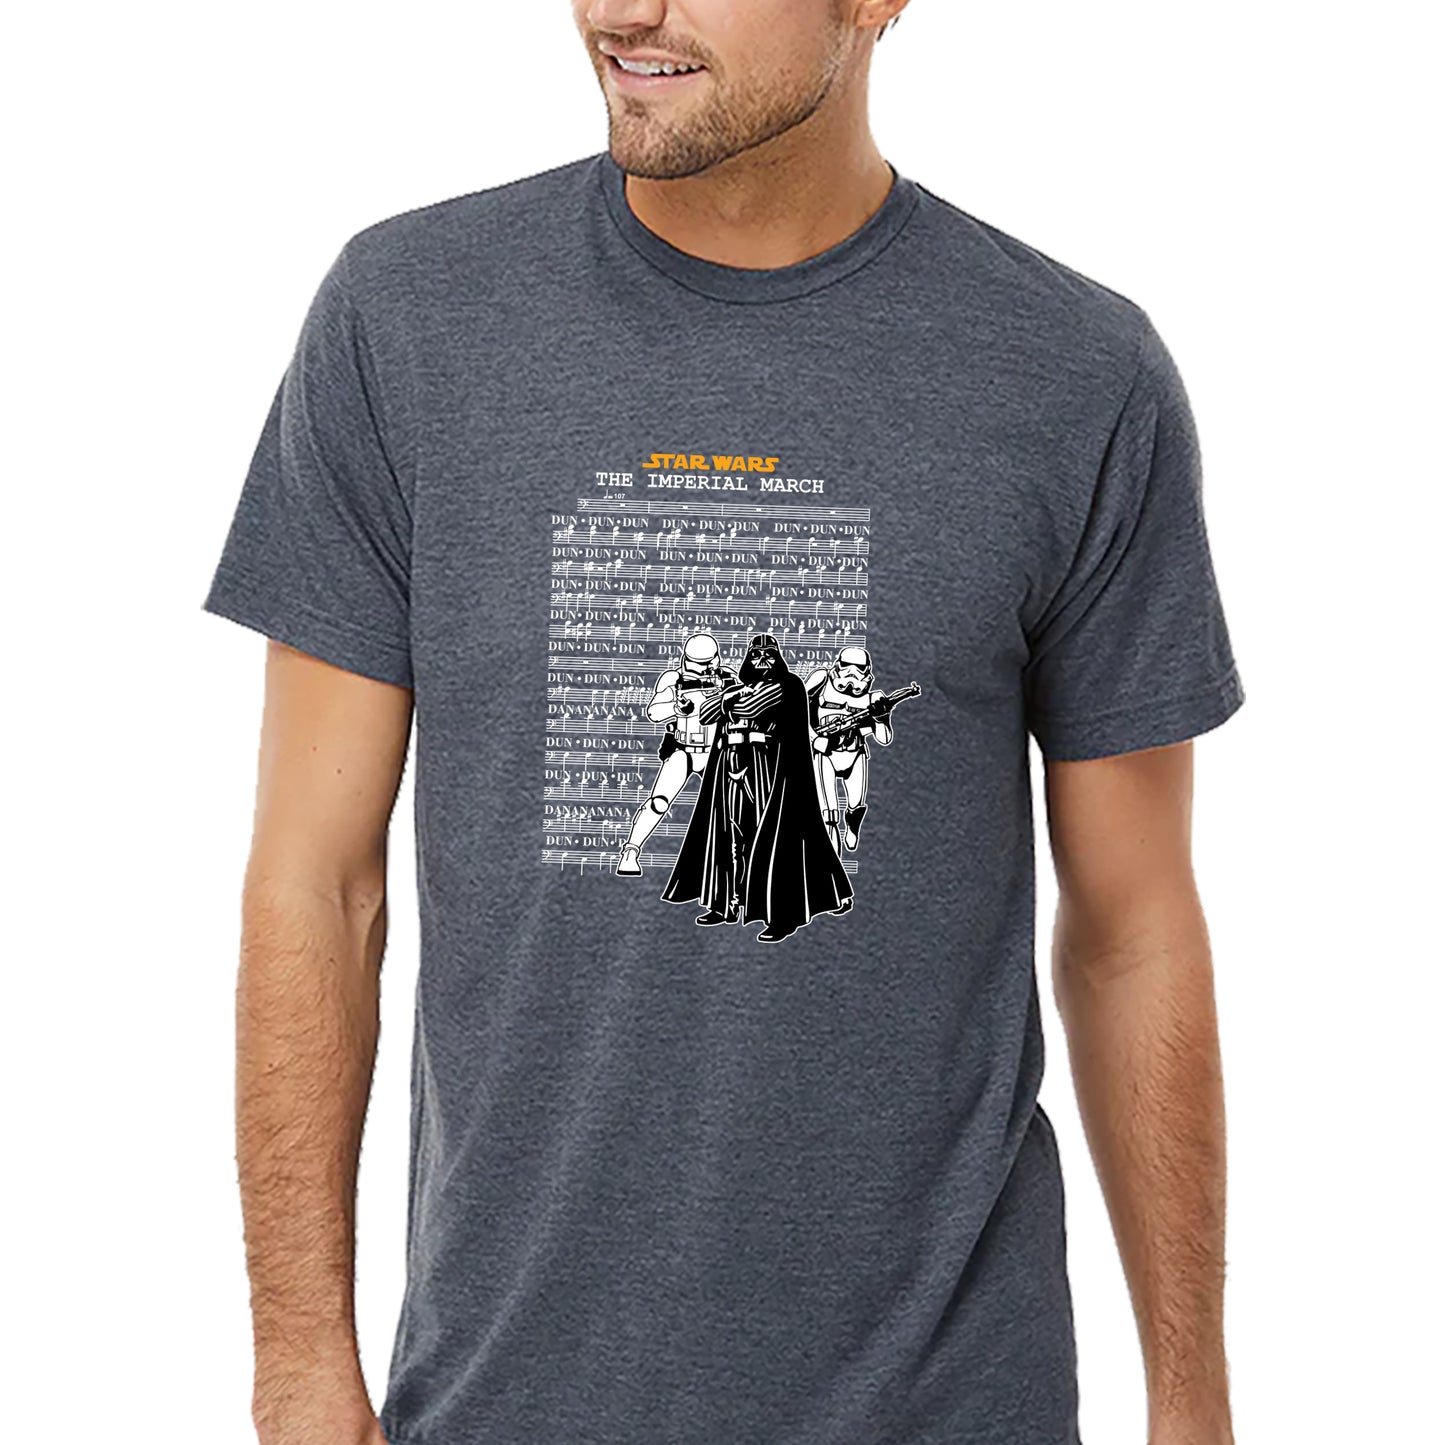 Imperial March T-shirt